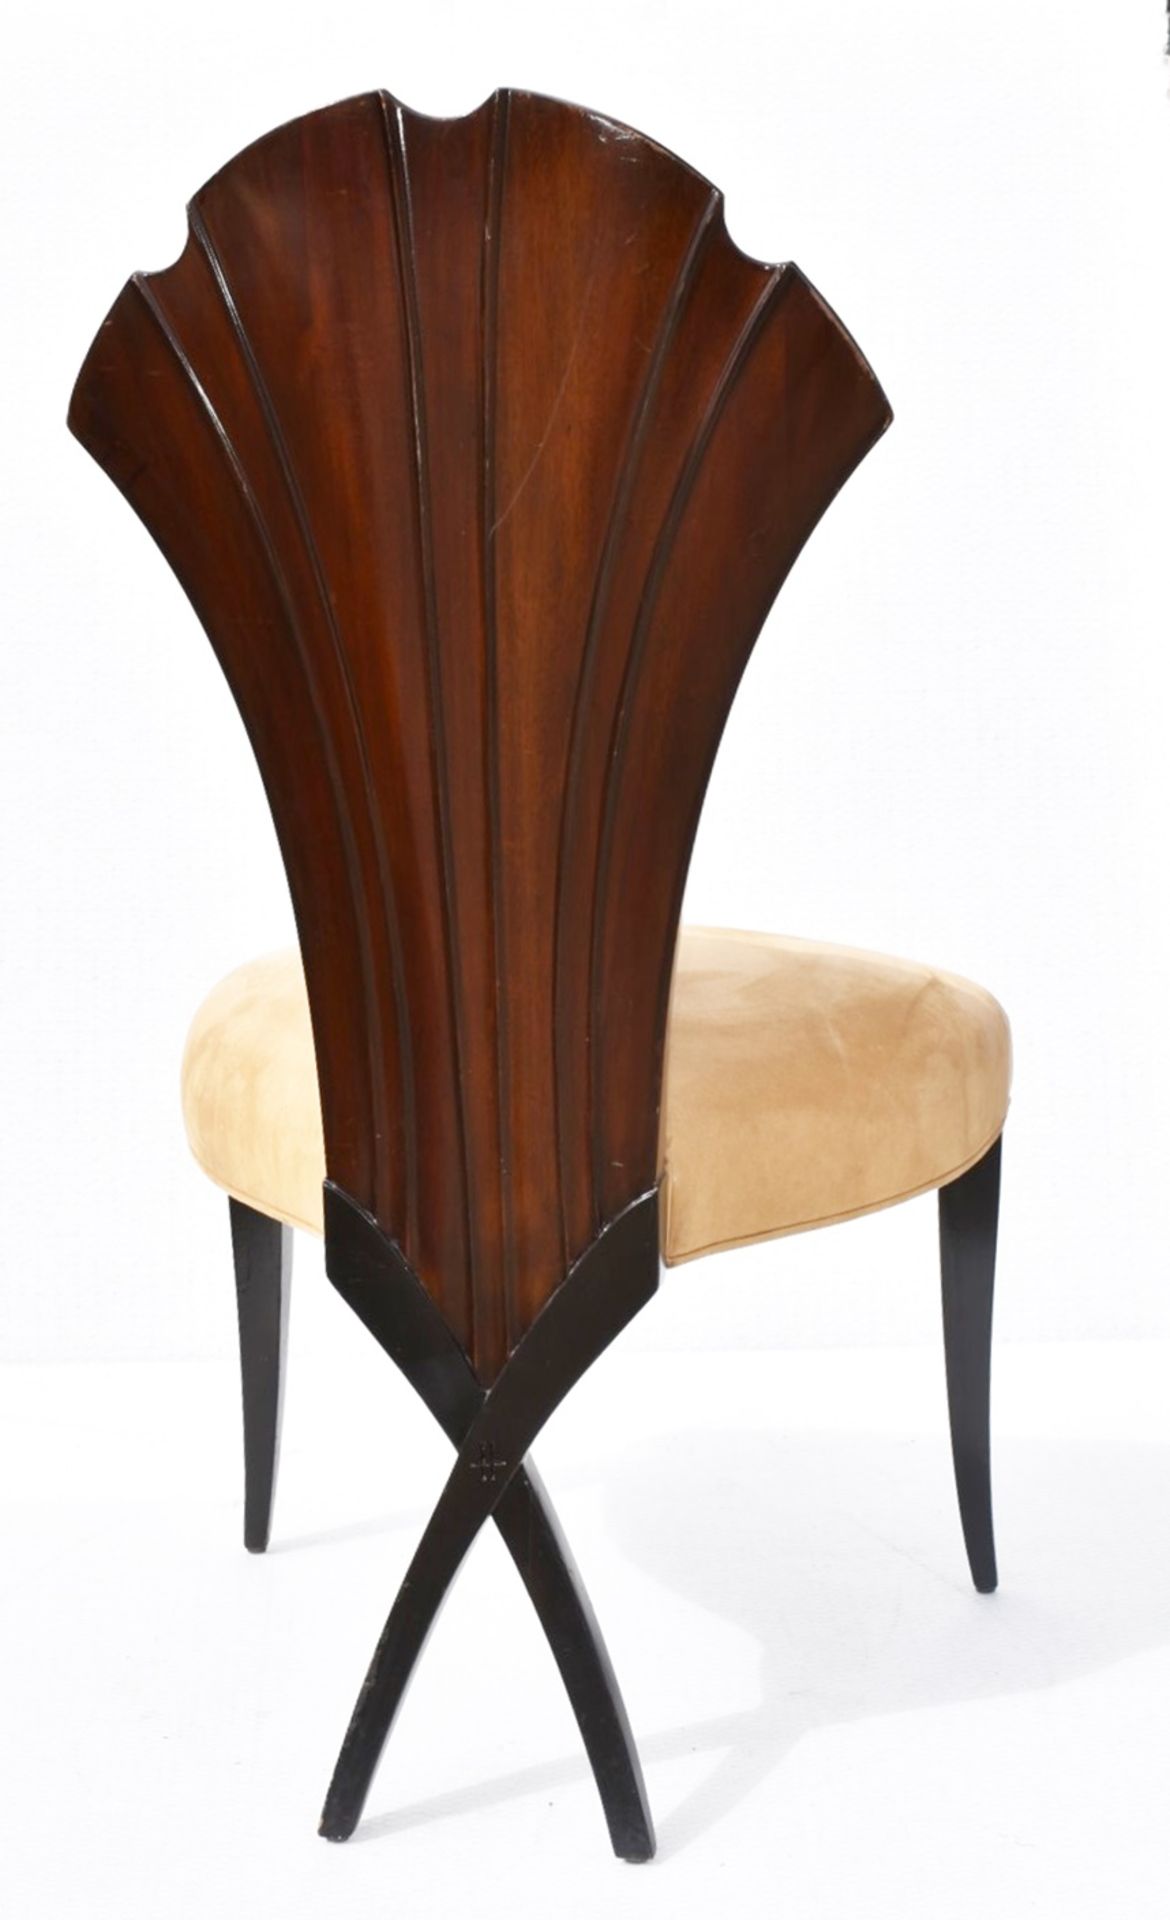 4 x CHRISTOPHER GUY 'La Croisette' Luxury Hand-carved Solid Mahogany Designer Dining Chairs - - Image 5 of 11